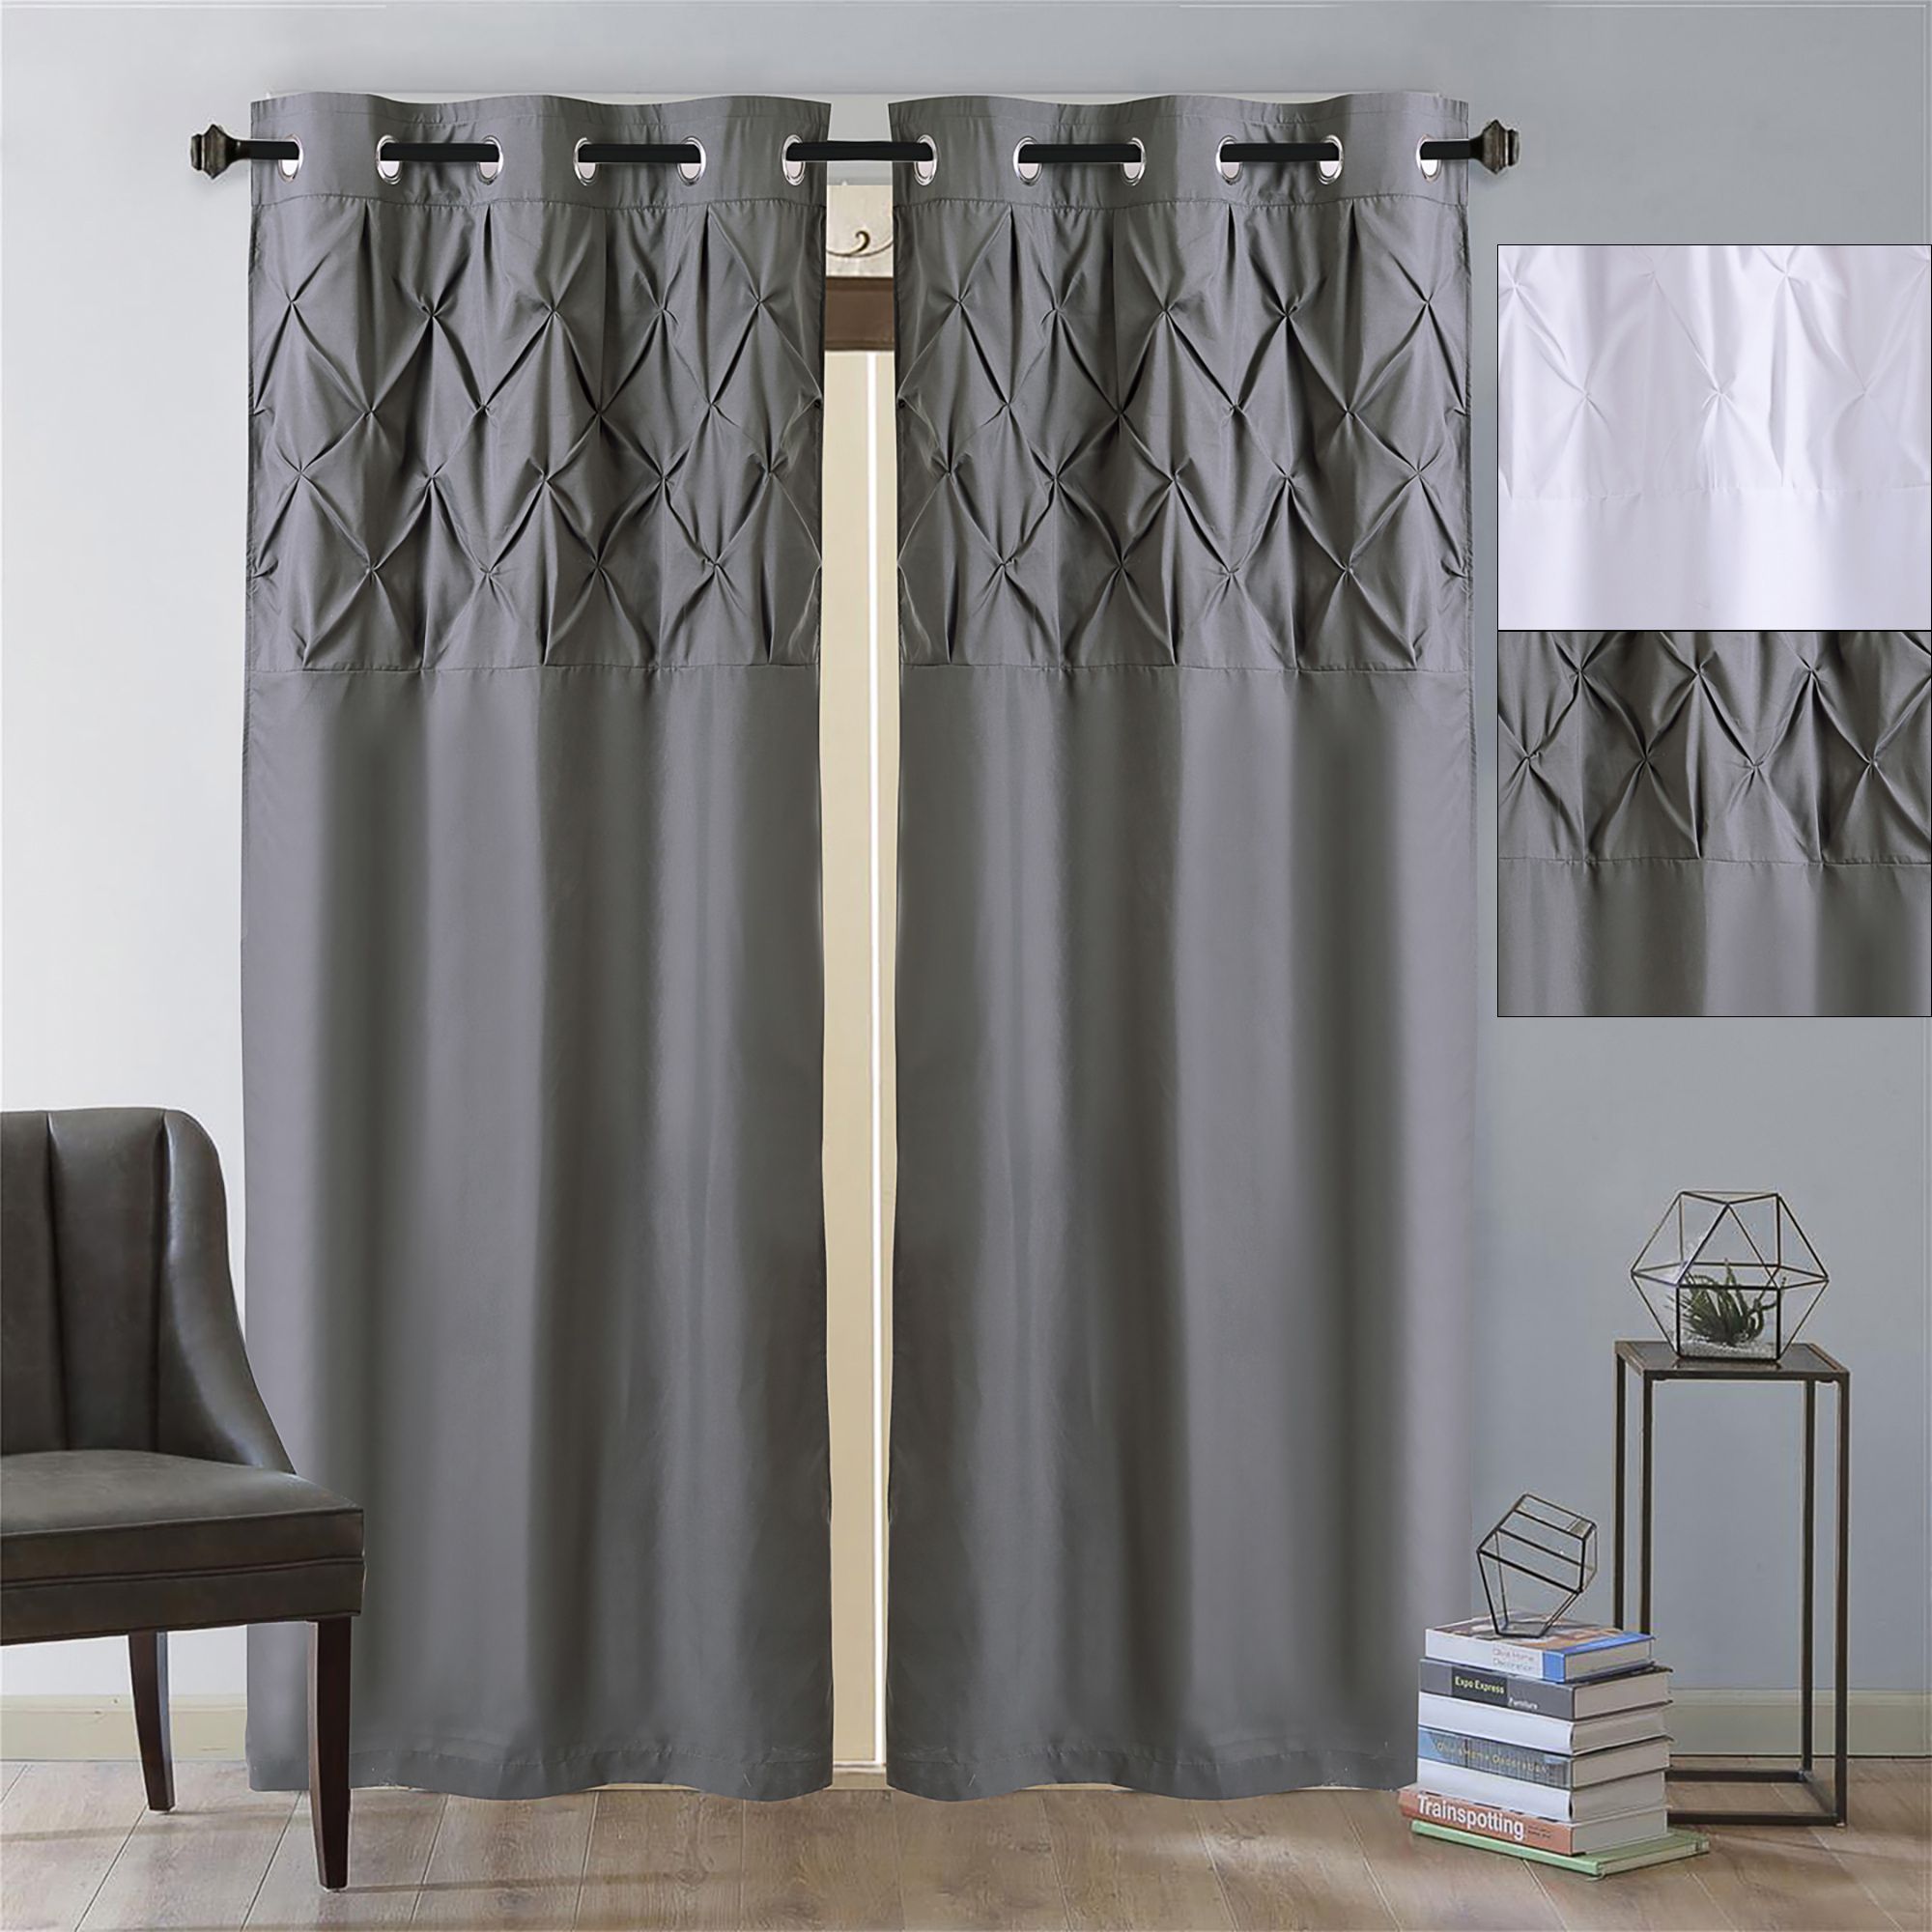 Details About Hudson Pintuck Window Curtain Panel Pair 84"x38" Pertaining To Tranquility Curtain Tier Pairs (View 15 of 20)